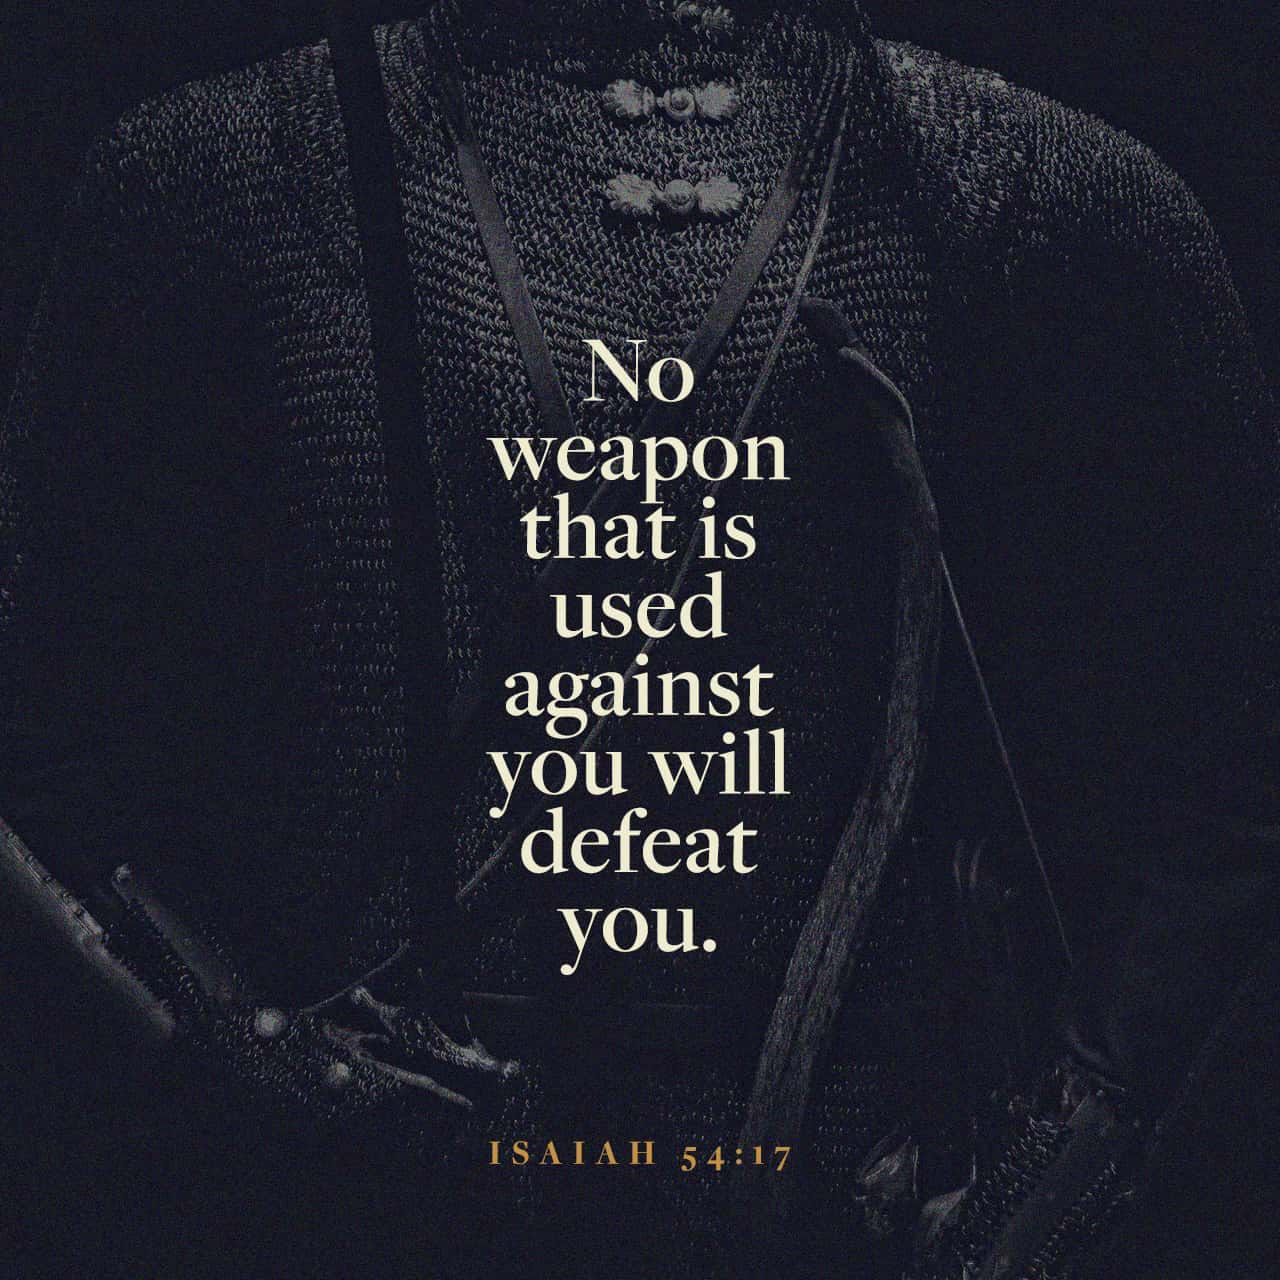 no weapons formed against me shall prosper scripture